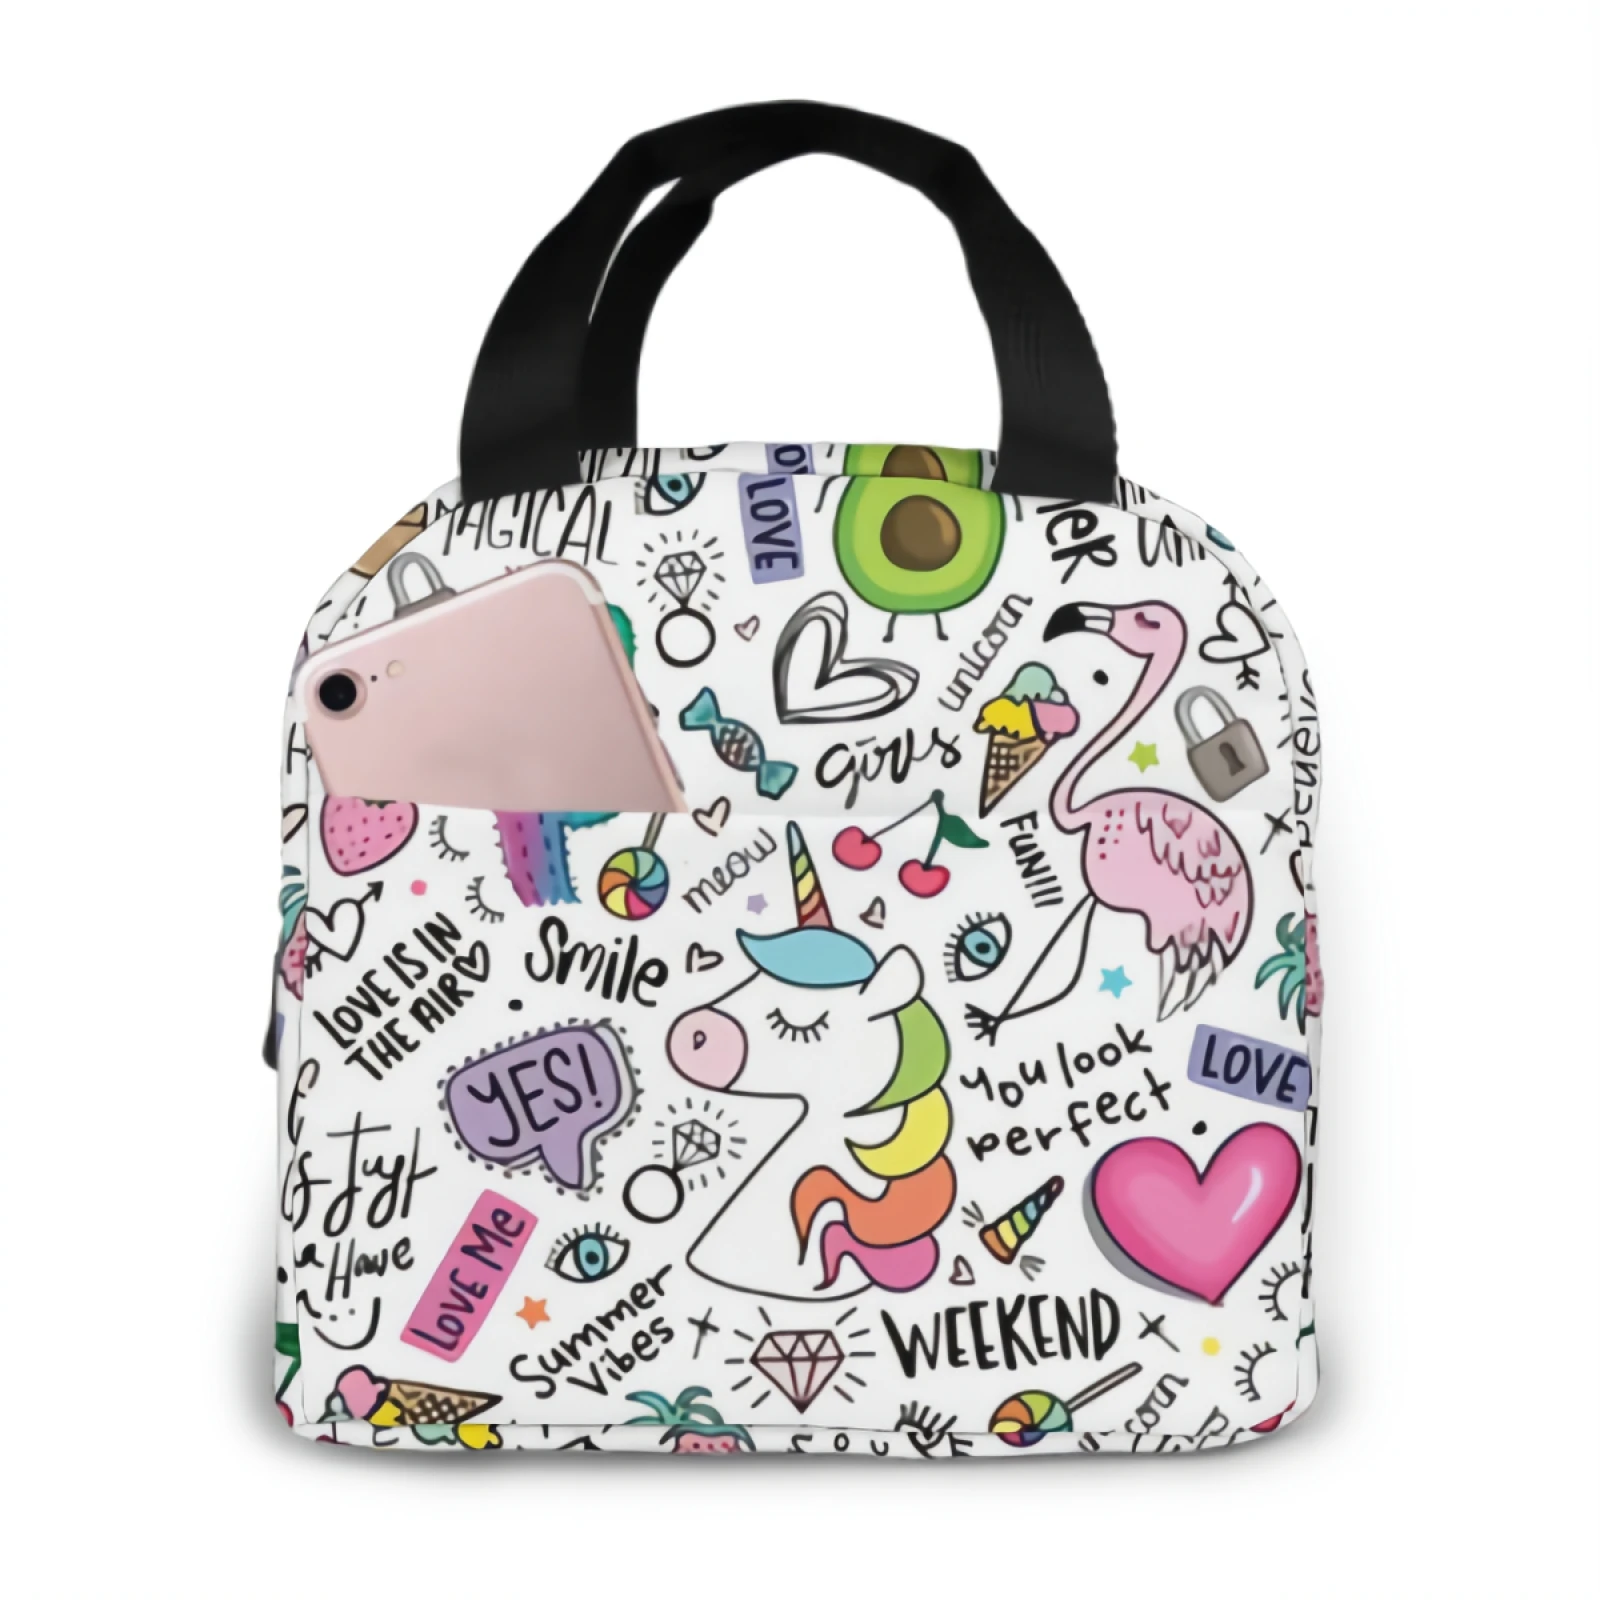 

Fun Doodle With Unicorn Flamingo Cactus Pineapple Insulated Lunch Bag lunch box containers for Women Men Office School Picnic